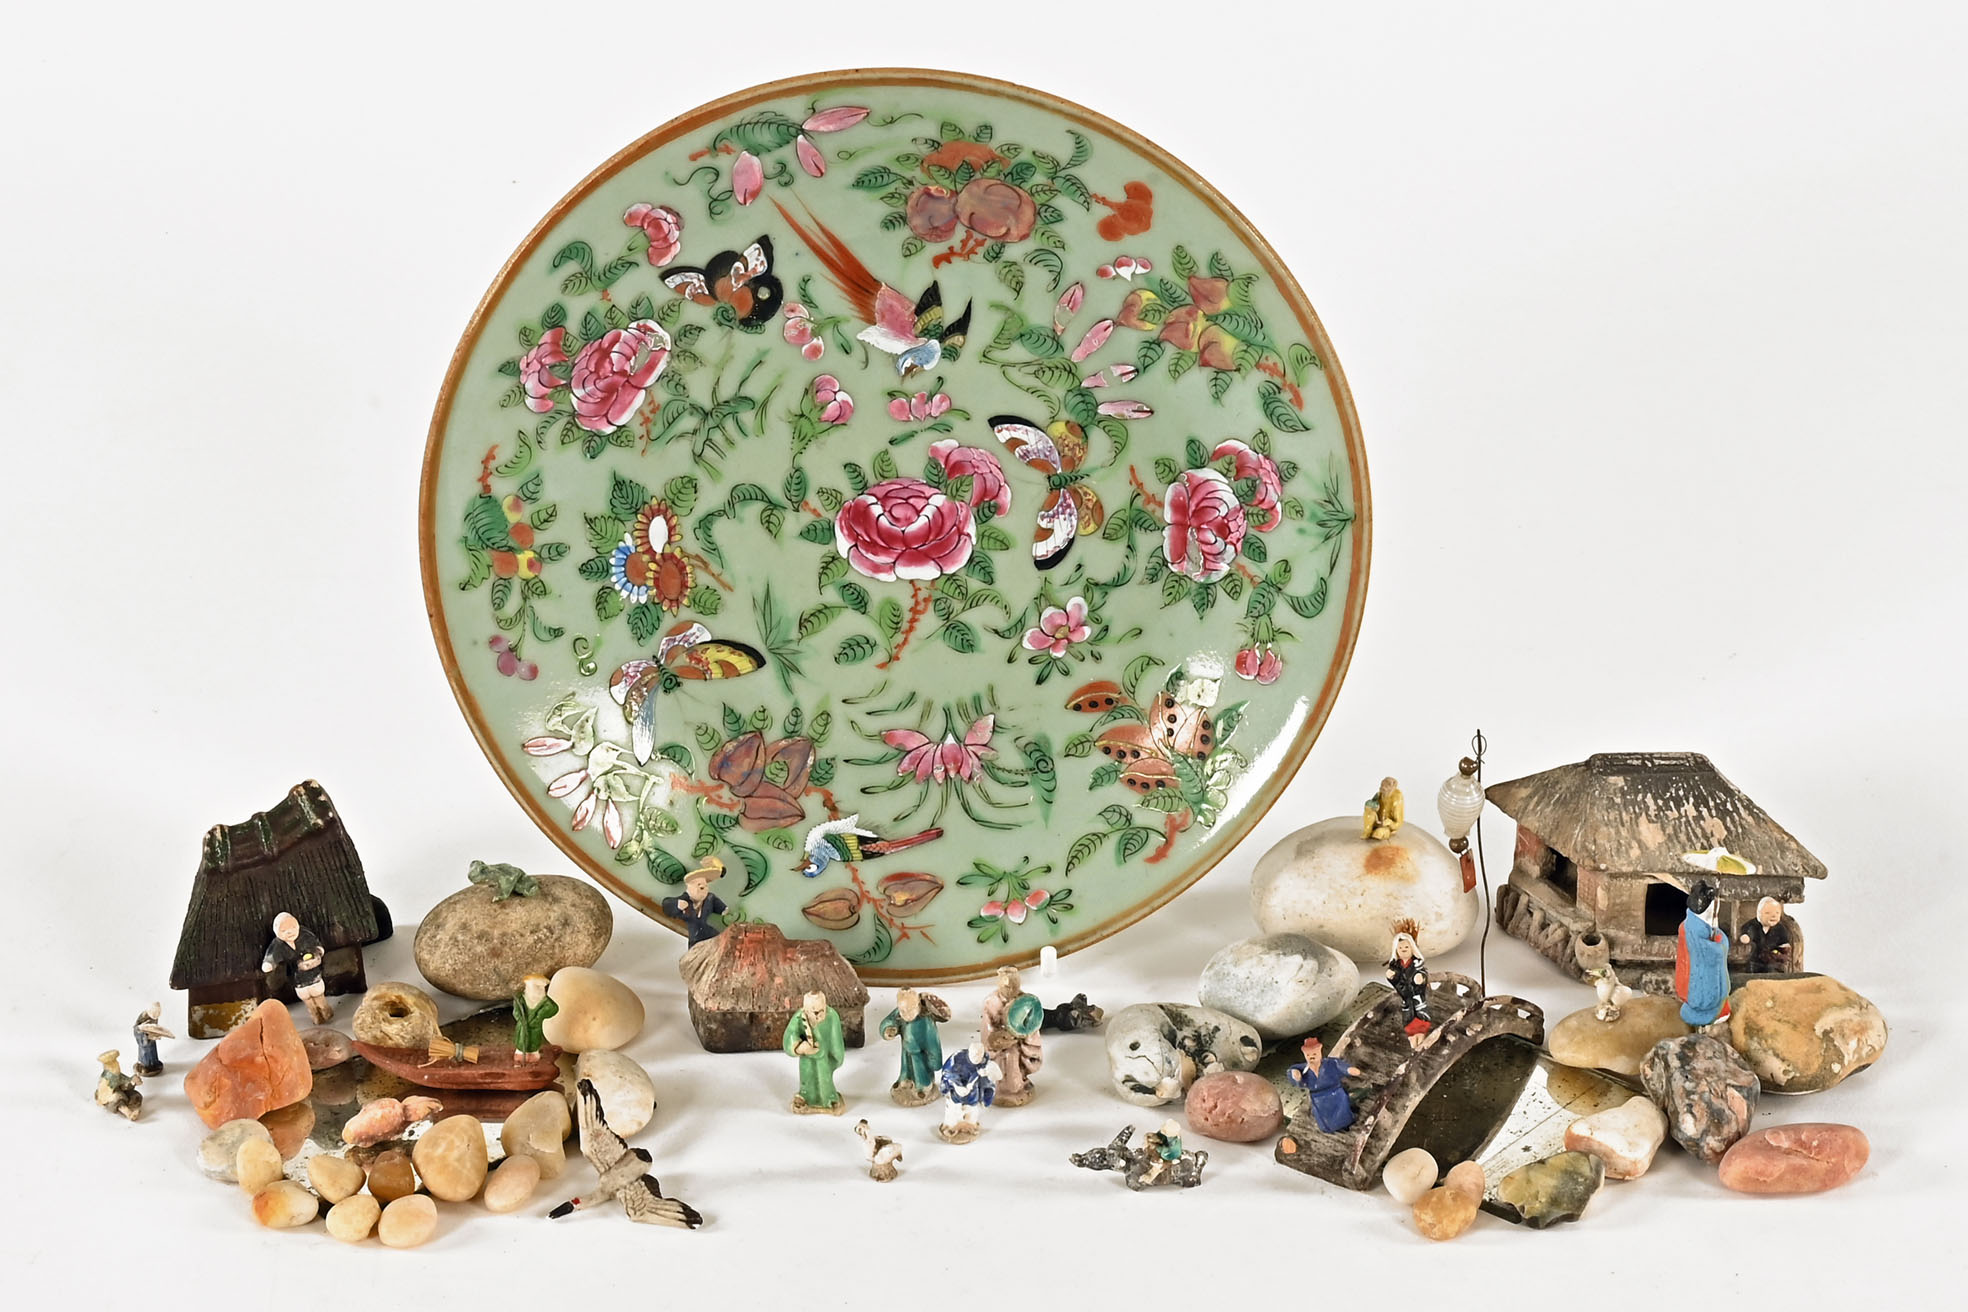 A collection of miniature Chinese garden ornaments, and a famille rose dish. Diameter 23 cm.